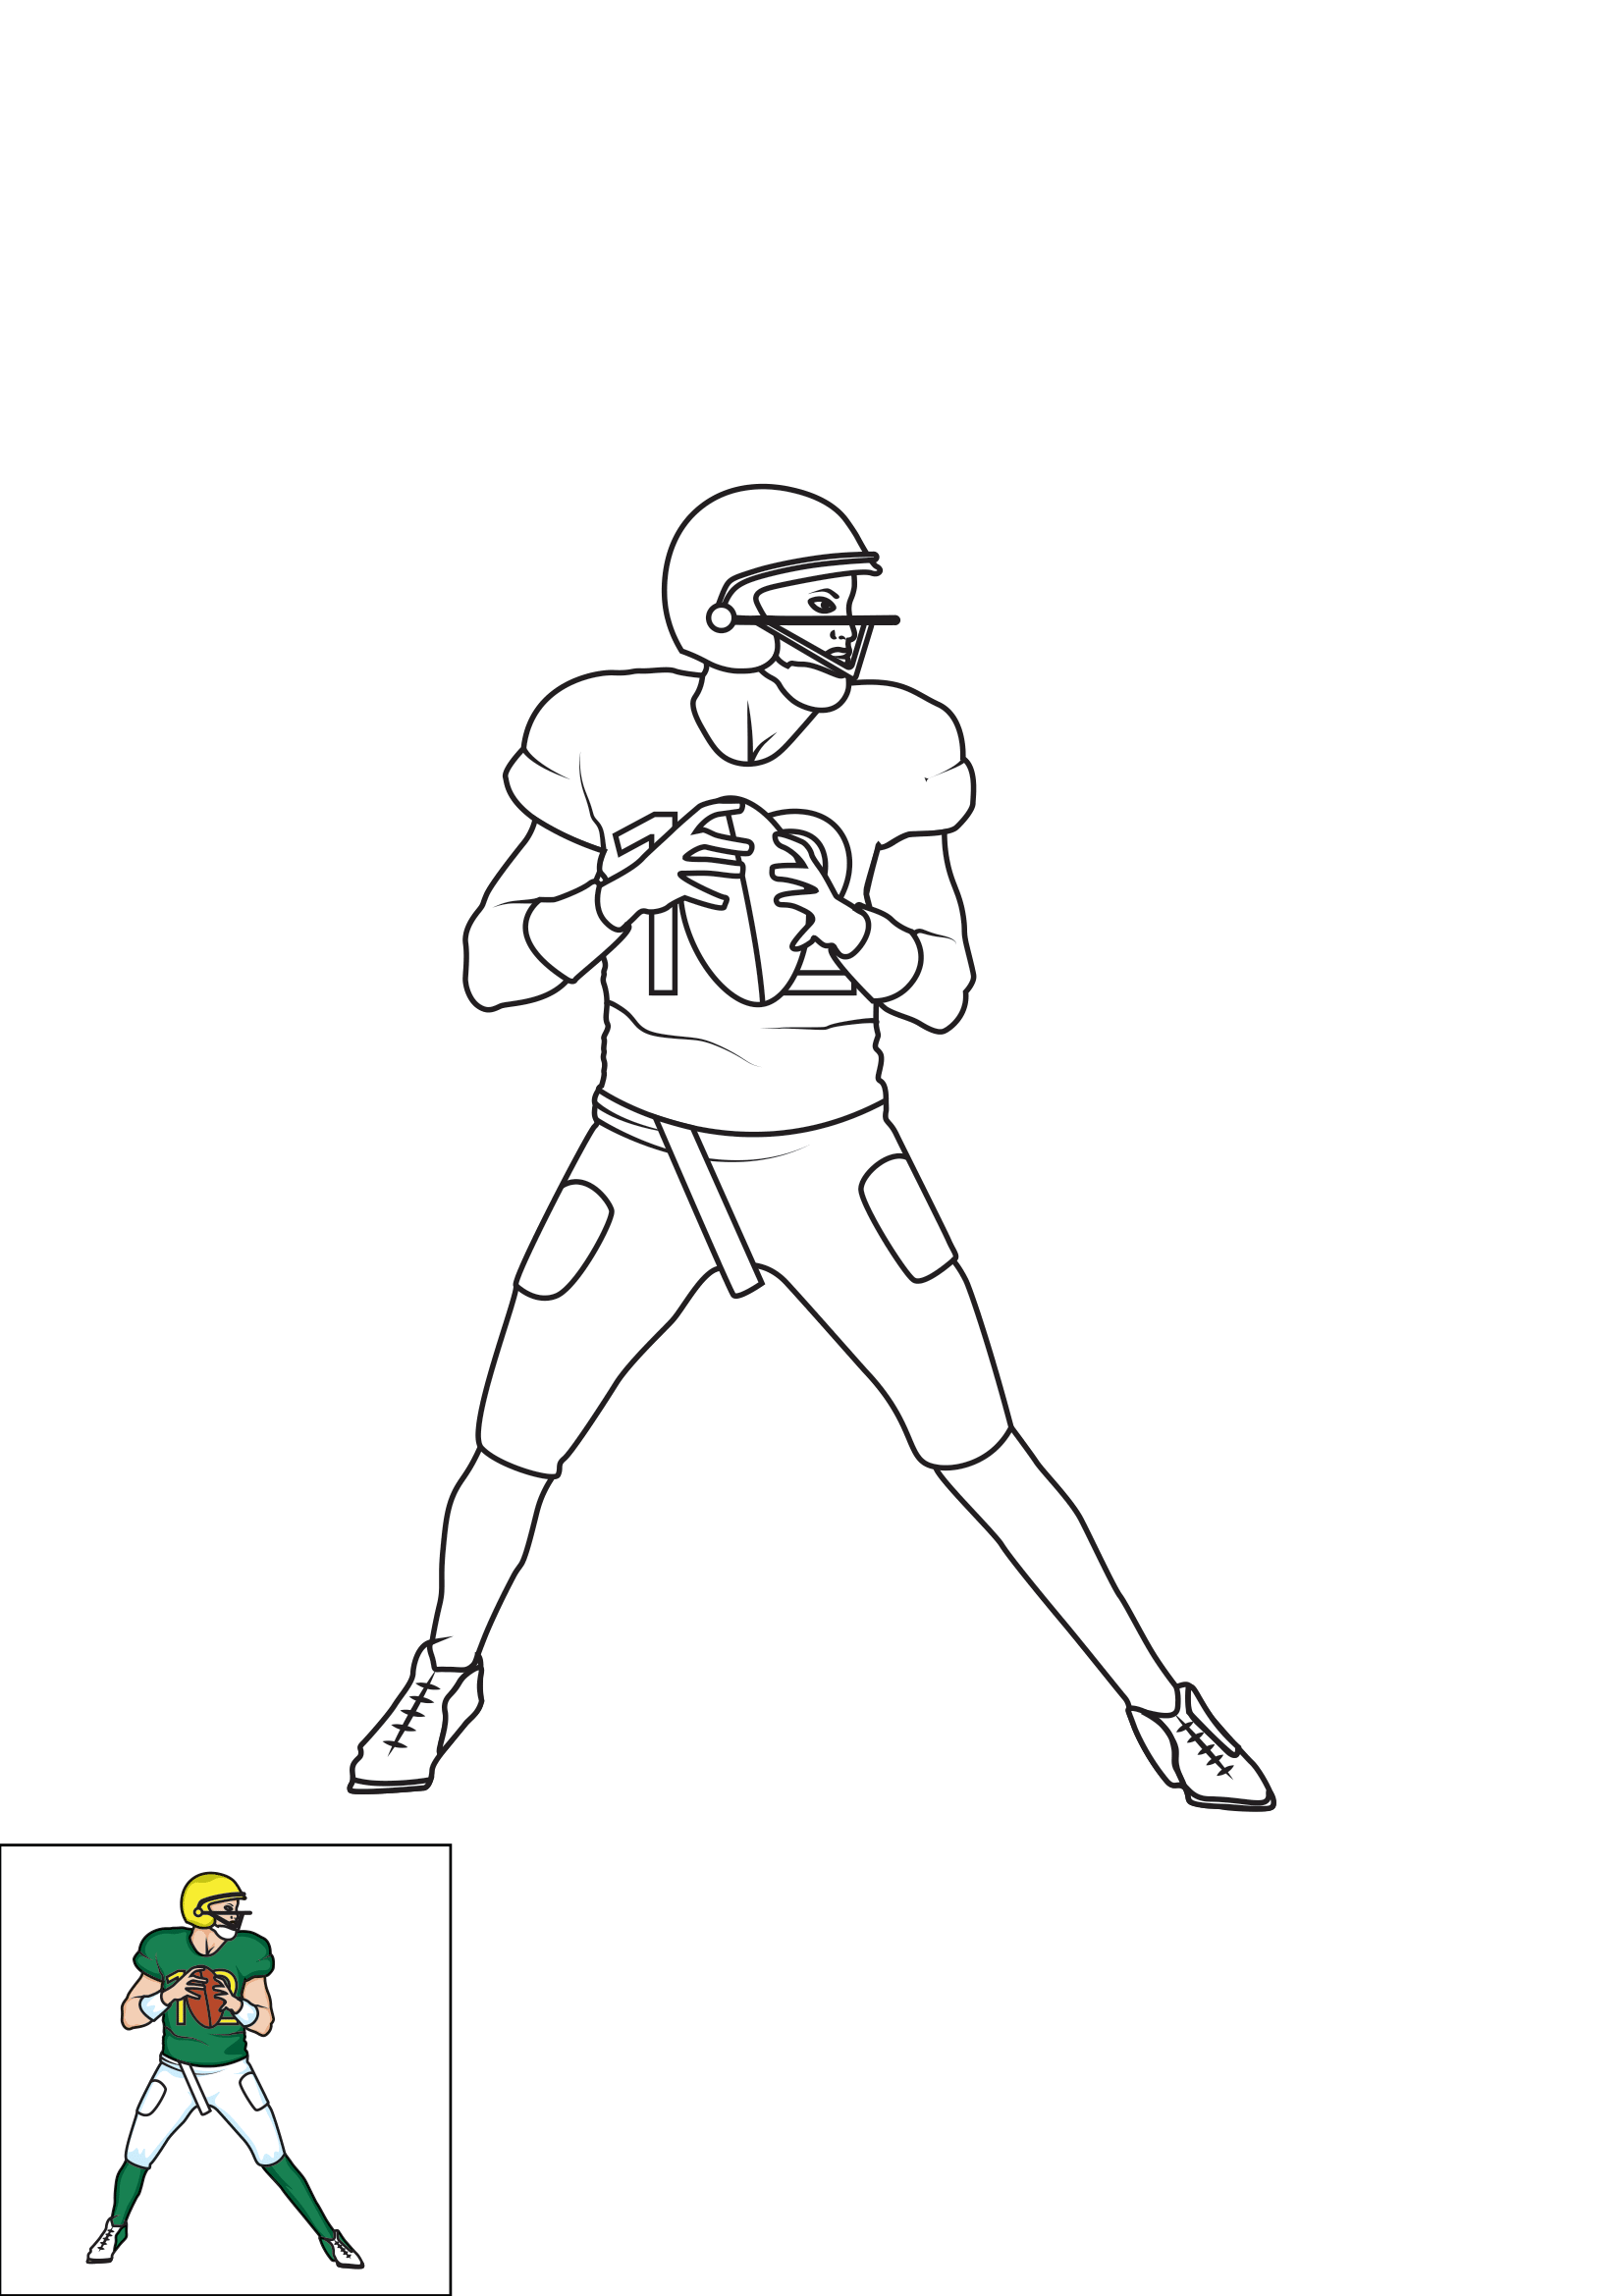 How to Draw A Football Player Step by Step Printable Color